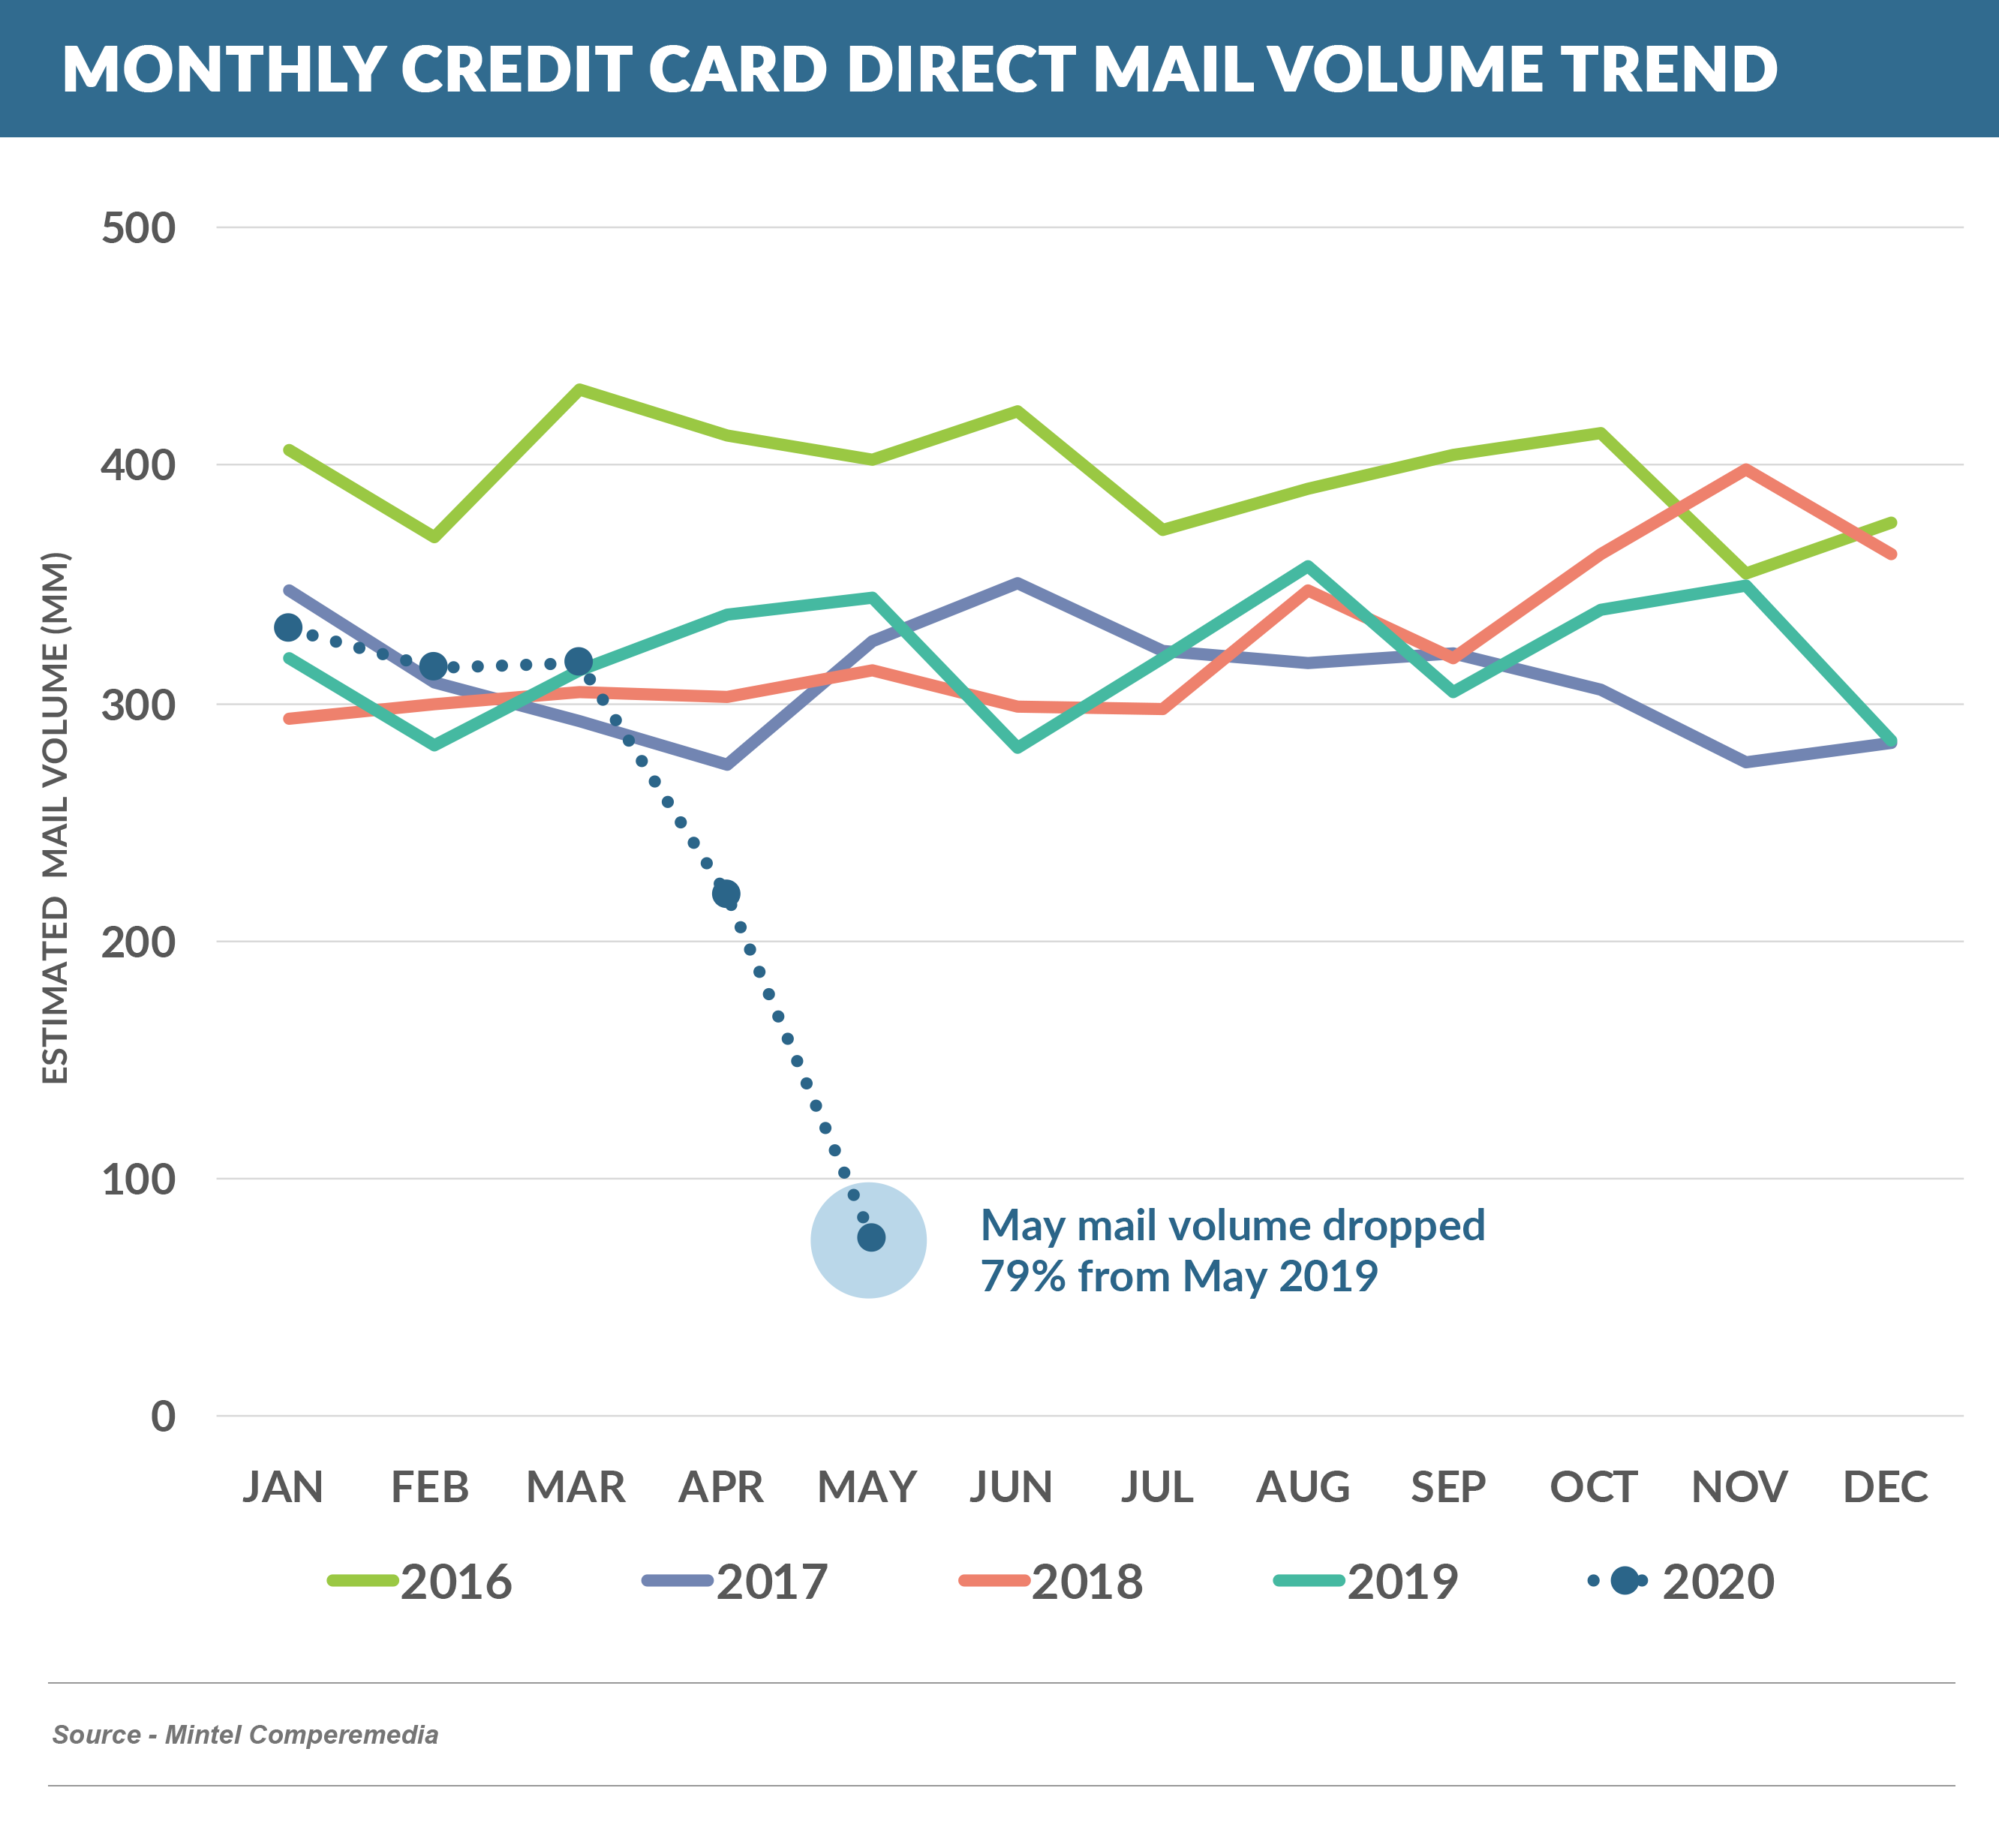 MONTHly credit card direct mail volume trend